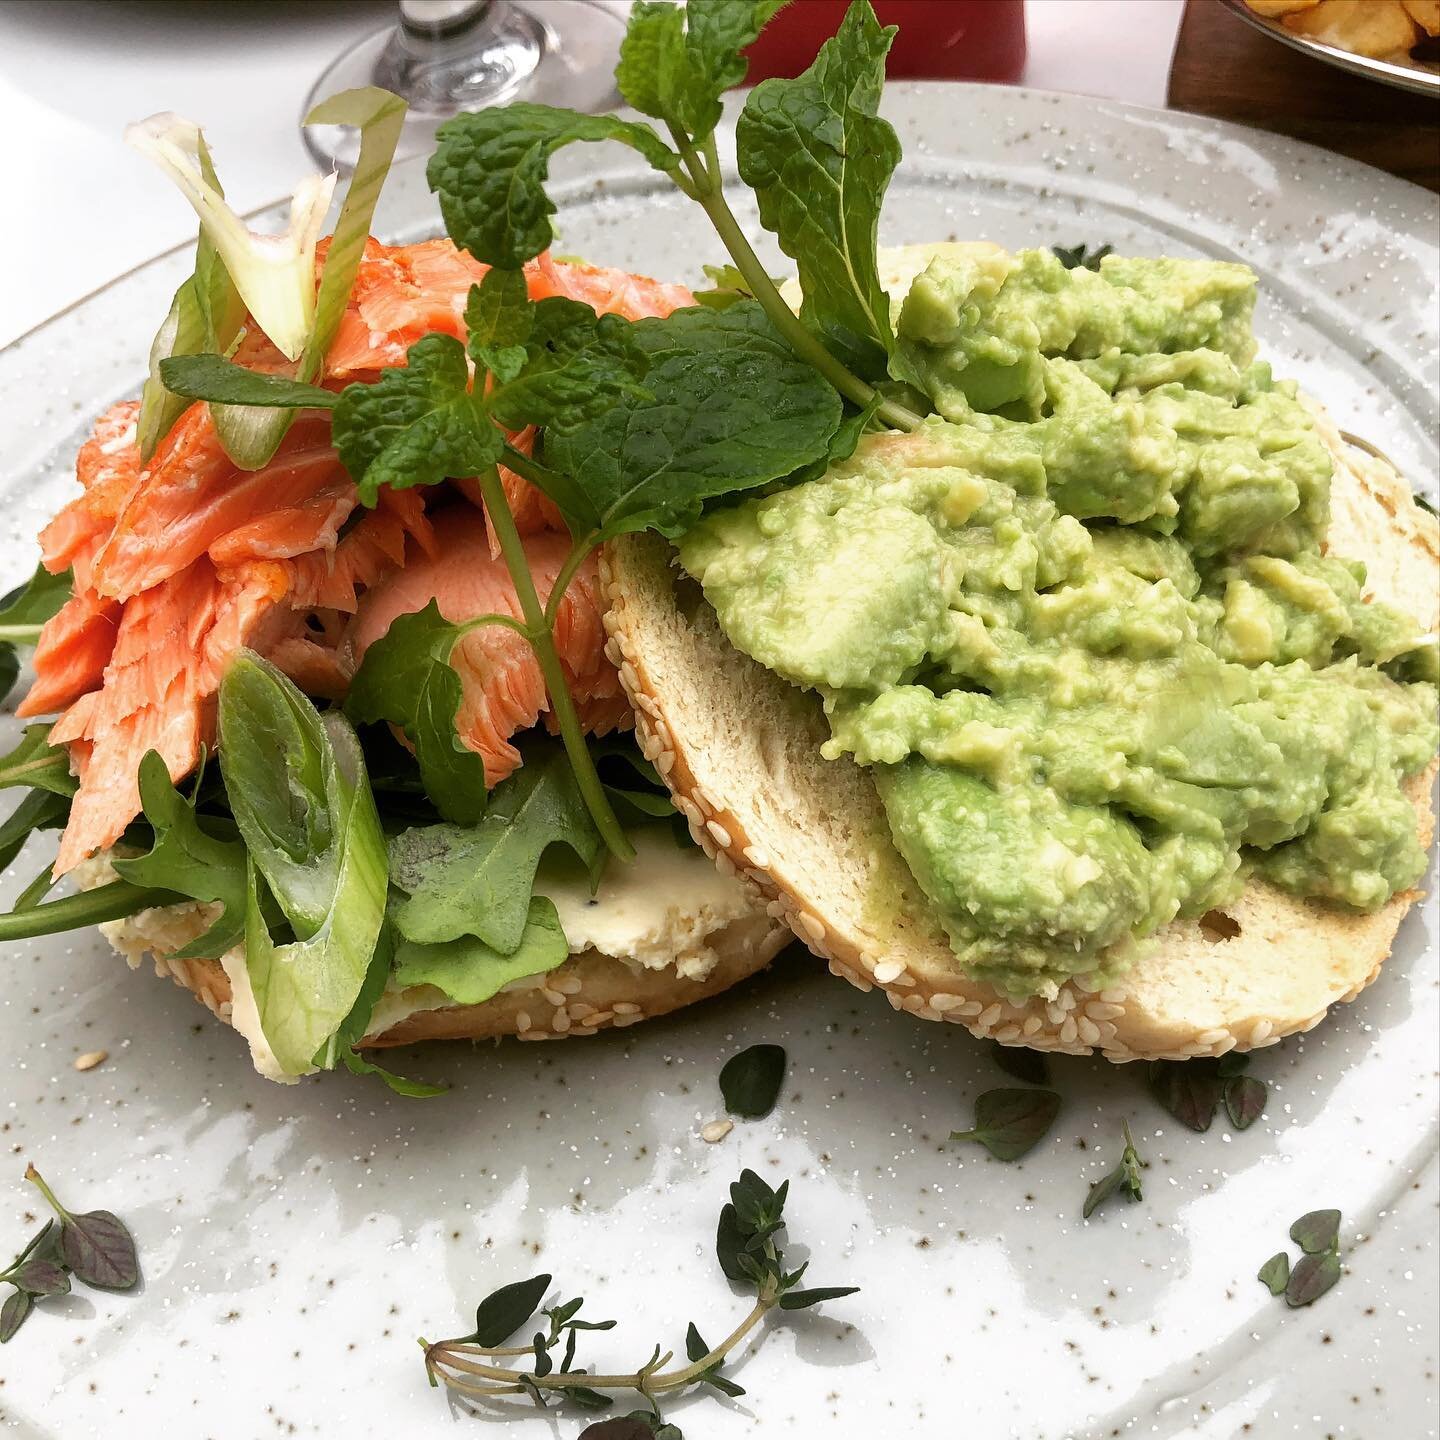 Goodhub Eatery is a classic kiwi brunch spot on the Hibiscus Coast highway in Orewa. If you&rsquo;re looking for a great dog friendly bistro just steps from the beach, this is your place. Food tastes fresh and homemade, and the service is quite avera